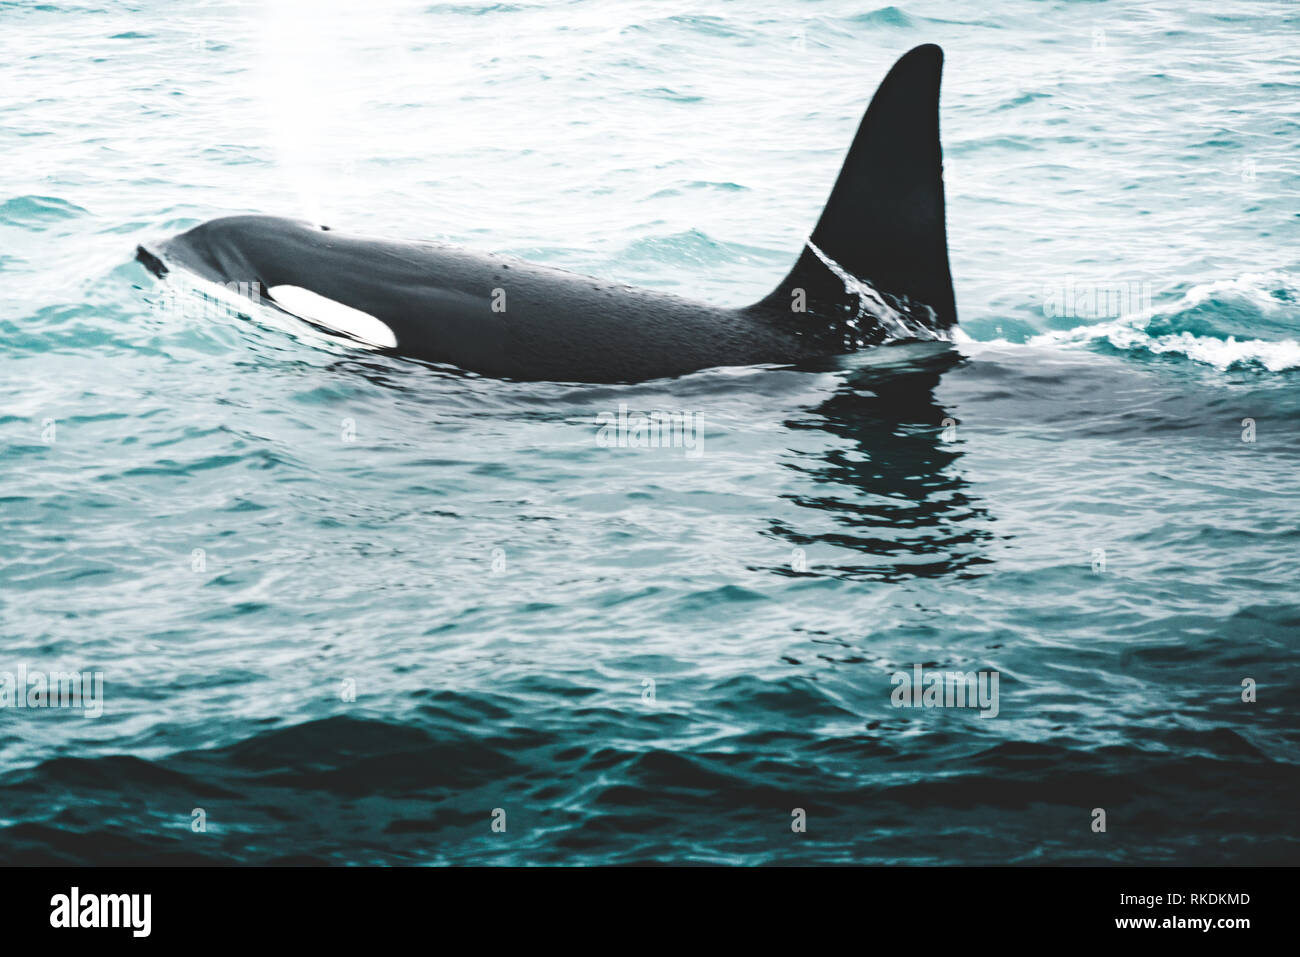 Orca Killer whale near the Iceland mountain coast during winter. Orcinus orca in the water habitat, wildlife scene from nature. Whales in beautiful Stock Photo